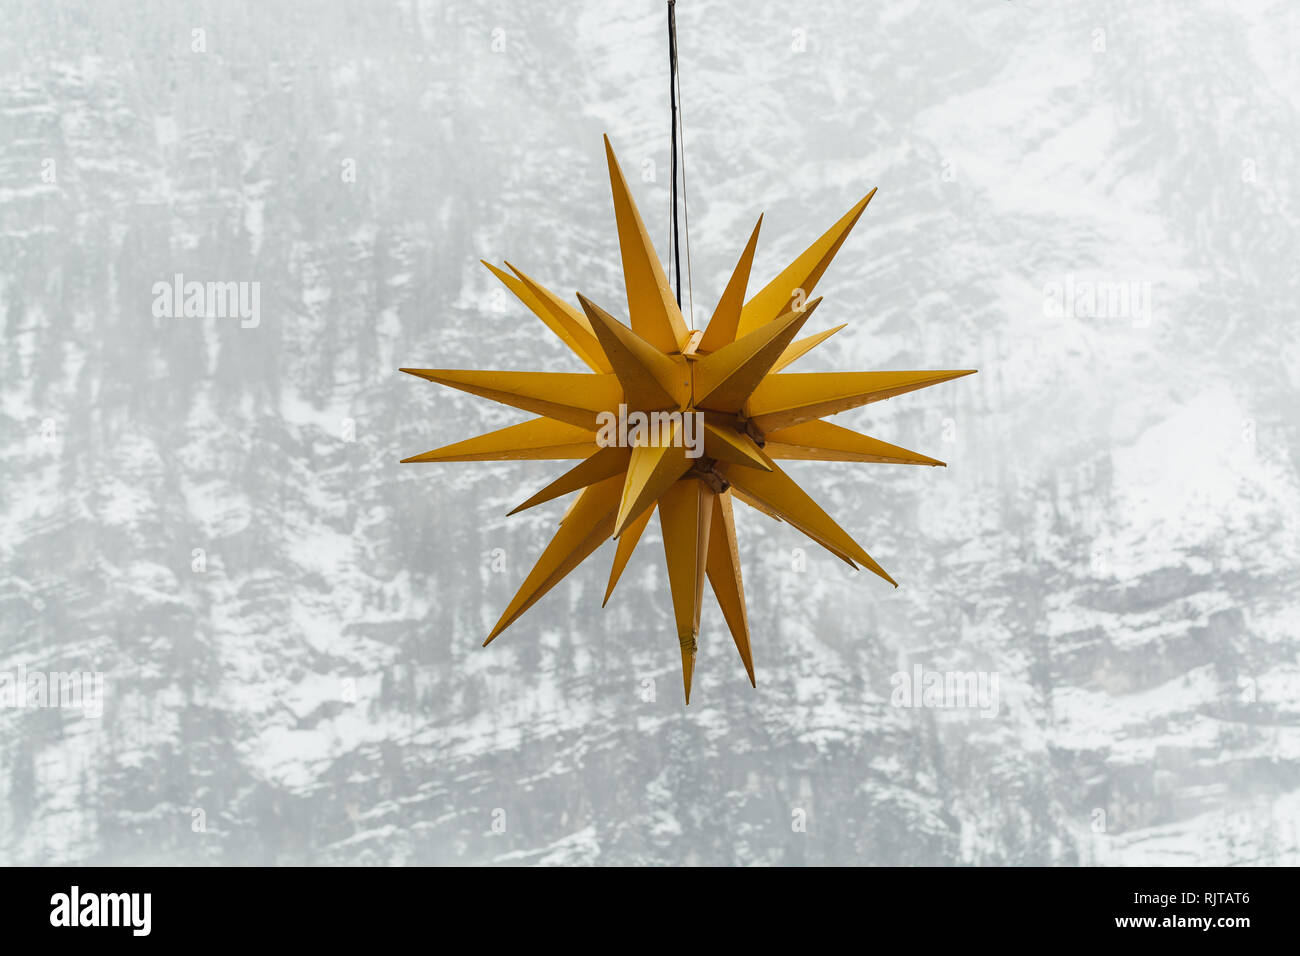 Yellow Christmas star with winter Alps mountains on the background in Hallstatt, Austria. Stock Photo